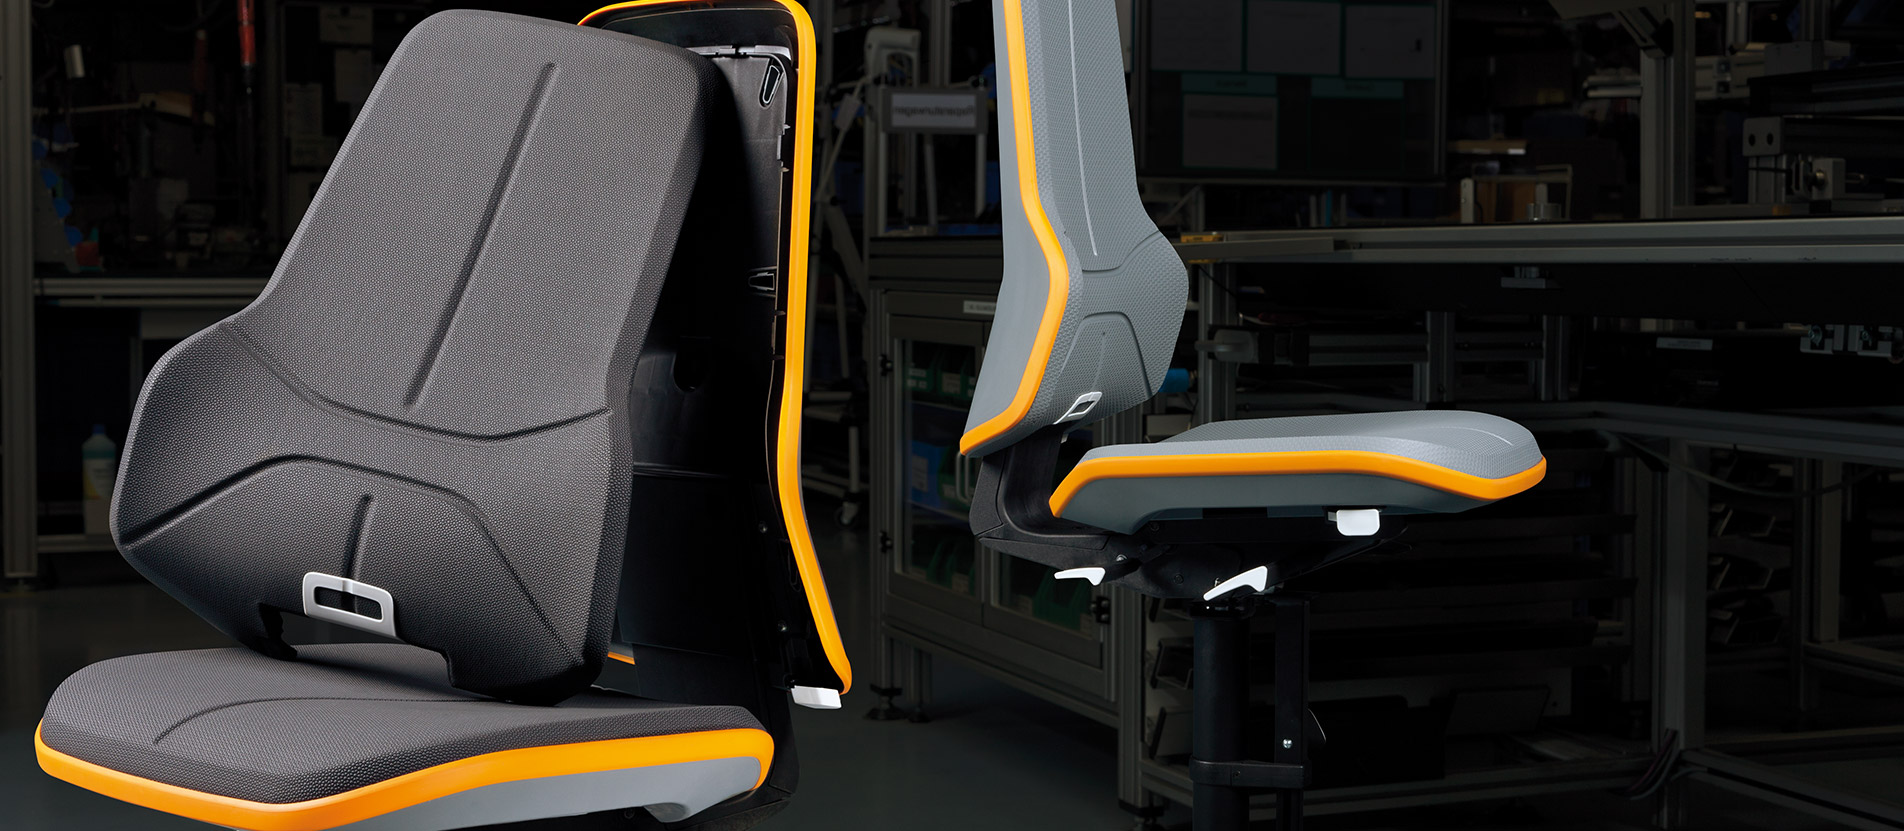 bimos new generation workplace chairs